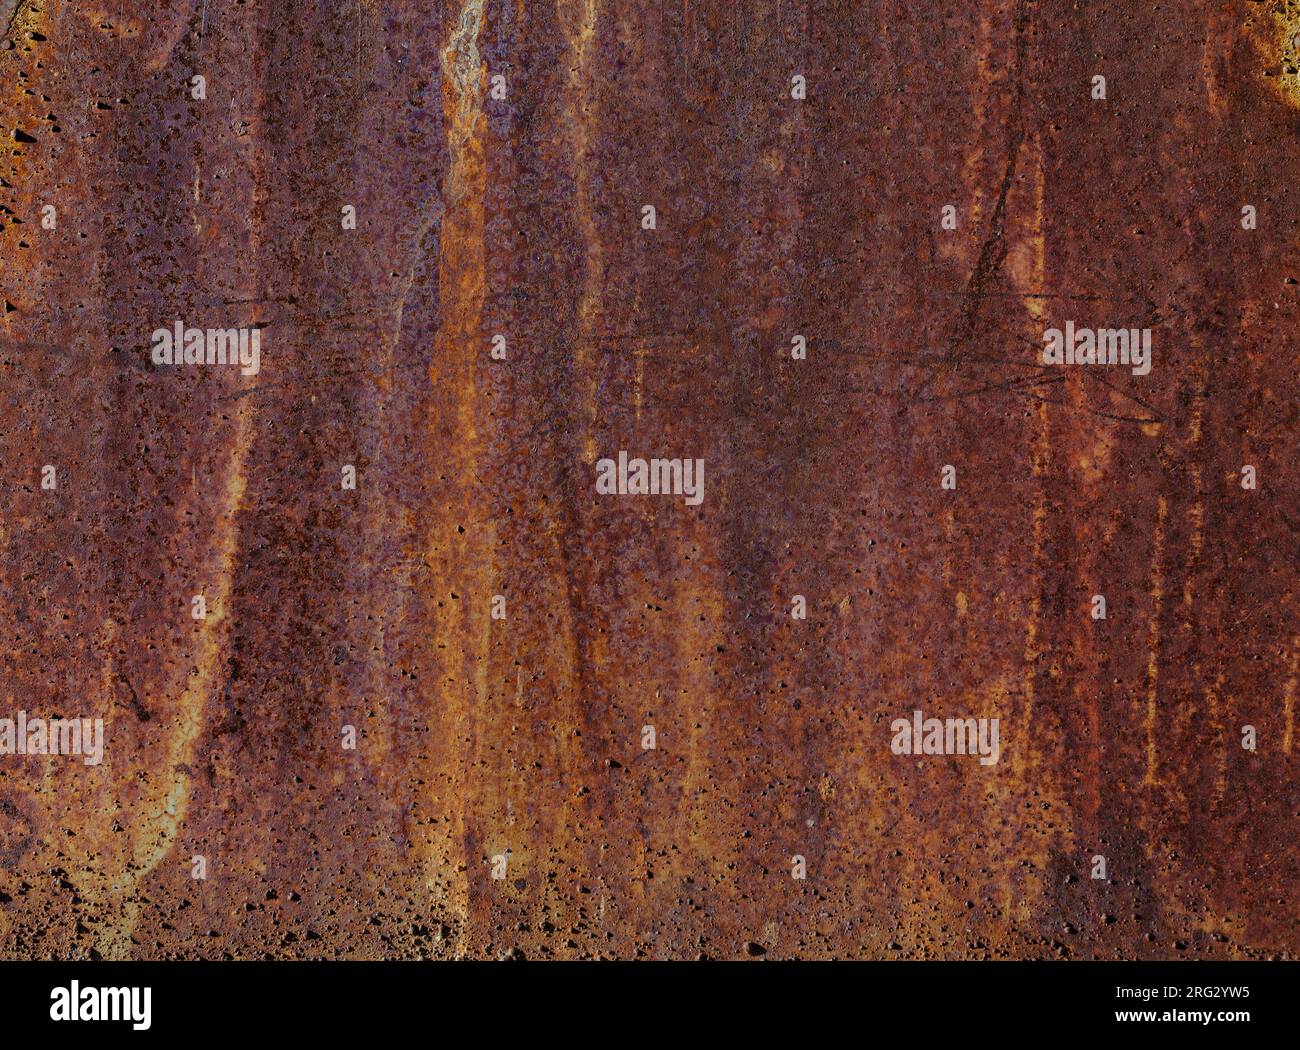 Rusty metal texture or background Stock Photo